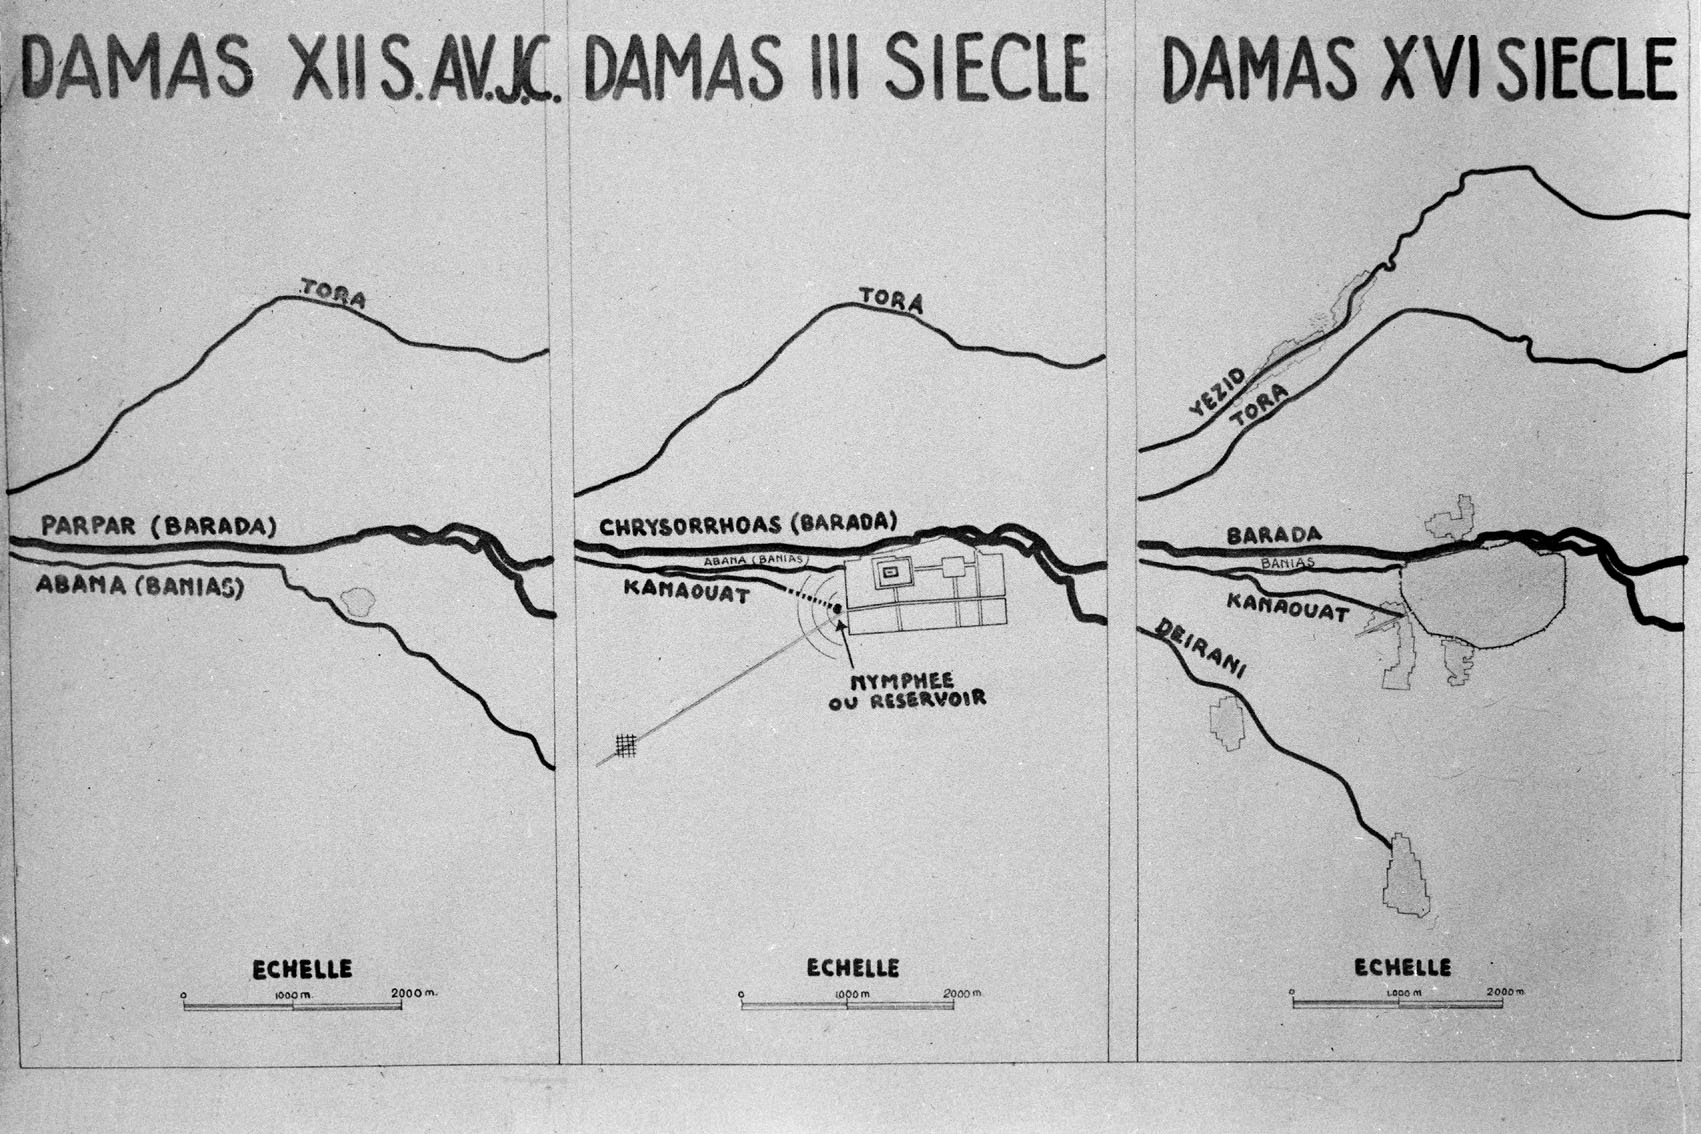 Damascus river systems over the centuries